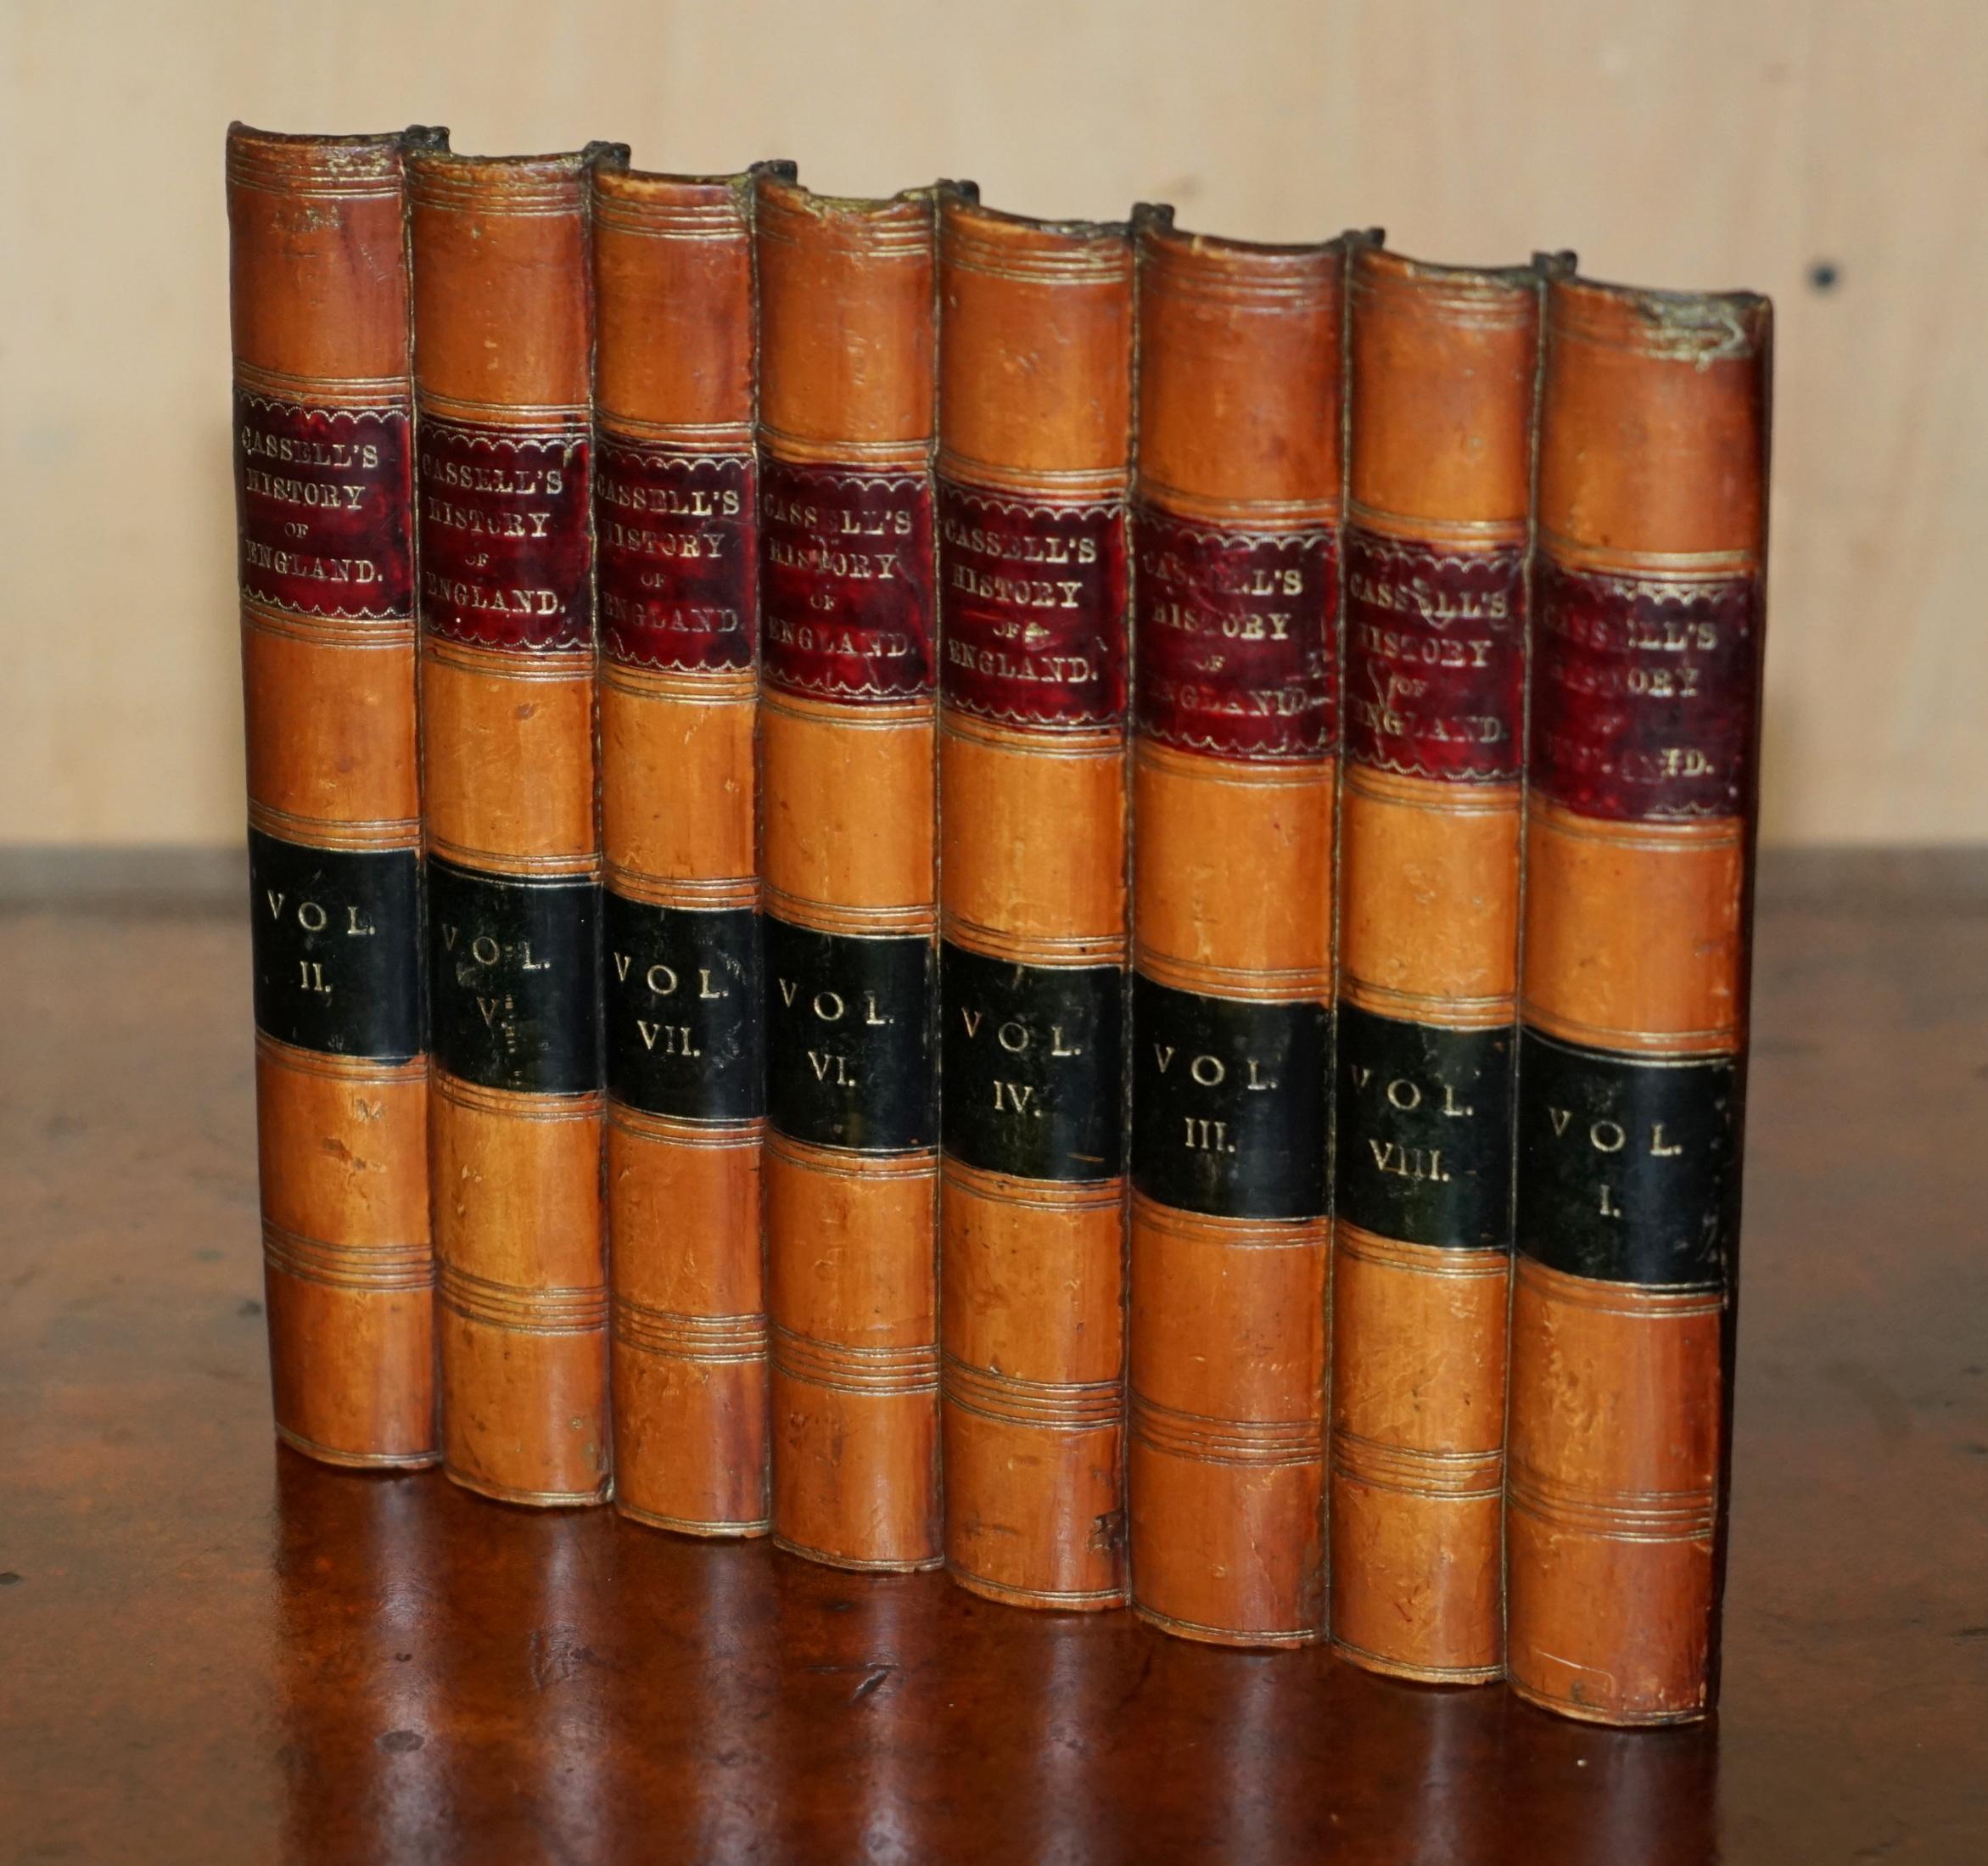 Royal House Antiques

Royal House Antiques is delighted to offer for sale this nice selection of faux book fronts for bookcases and display 

This is a nice suite of faux book fronts, they came from the warehouse sale of Bevan Funnell when they were